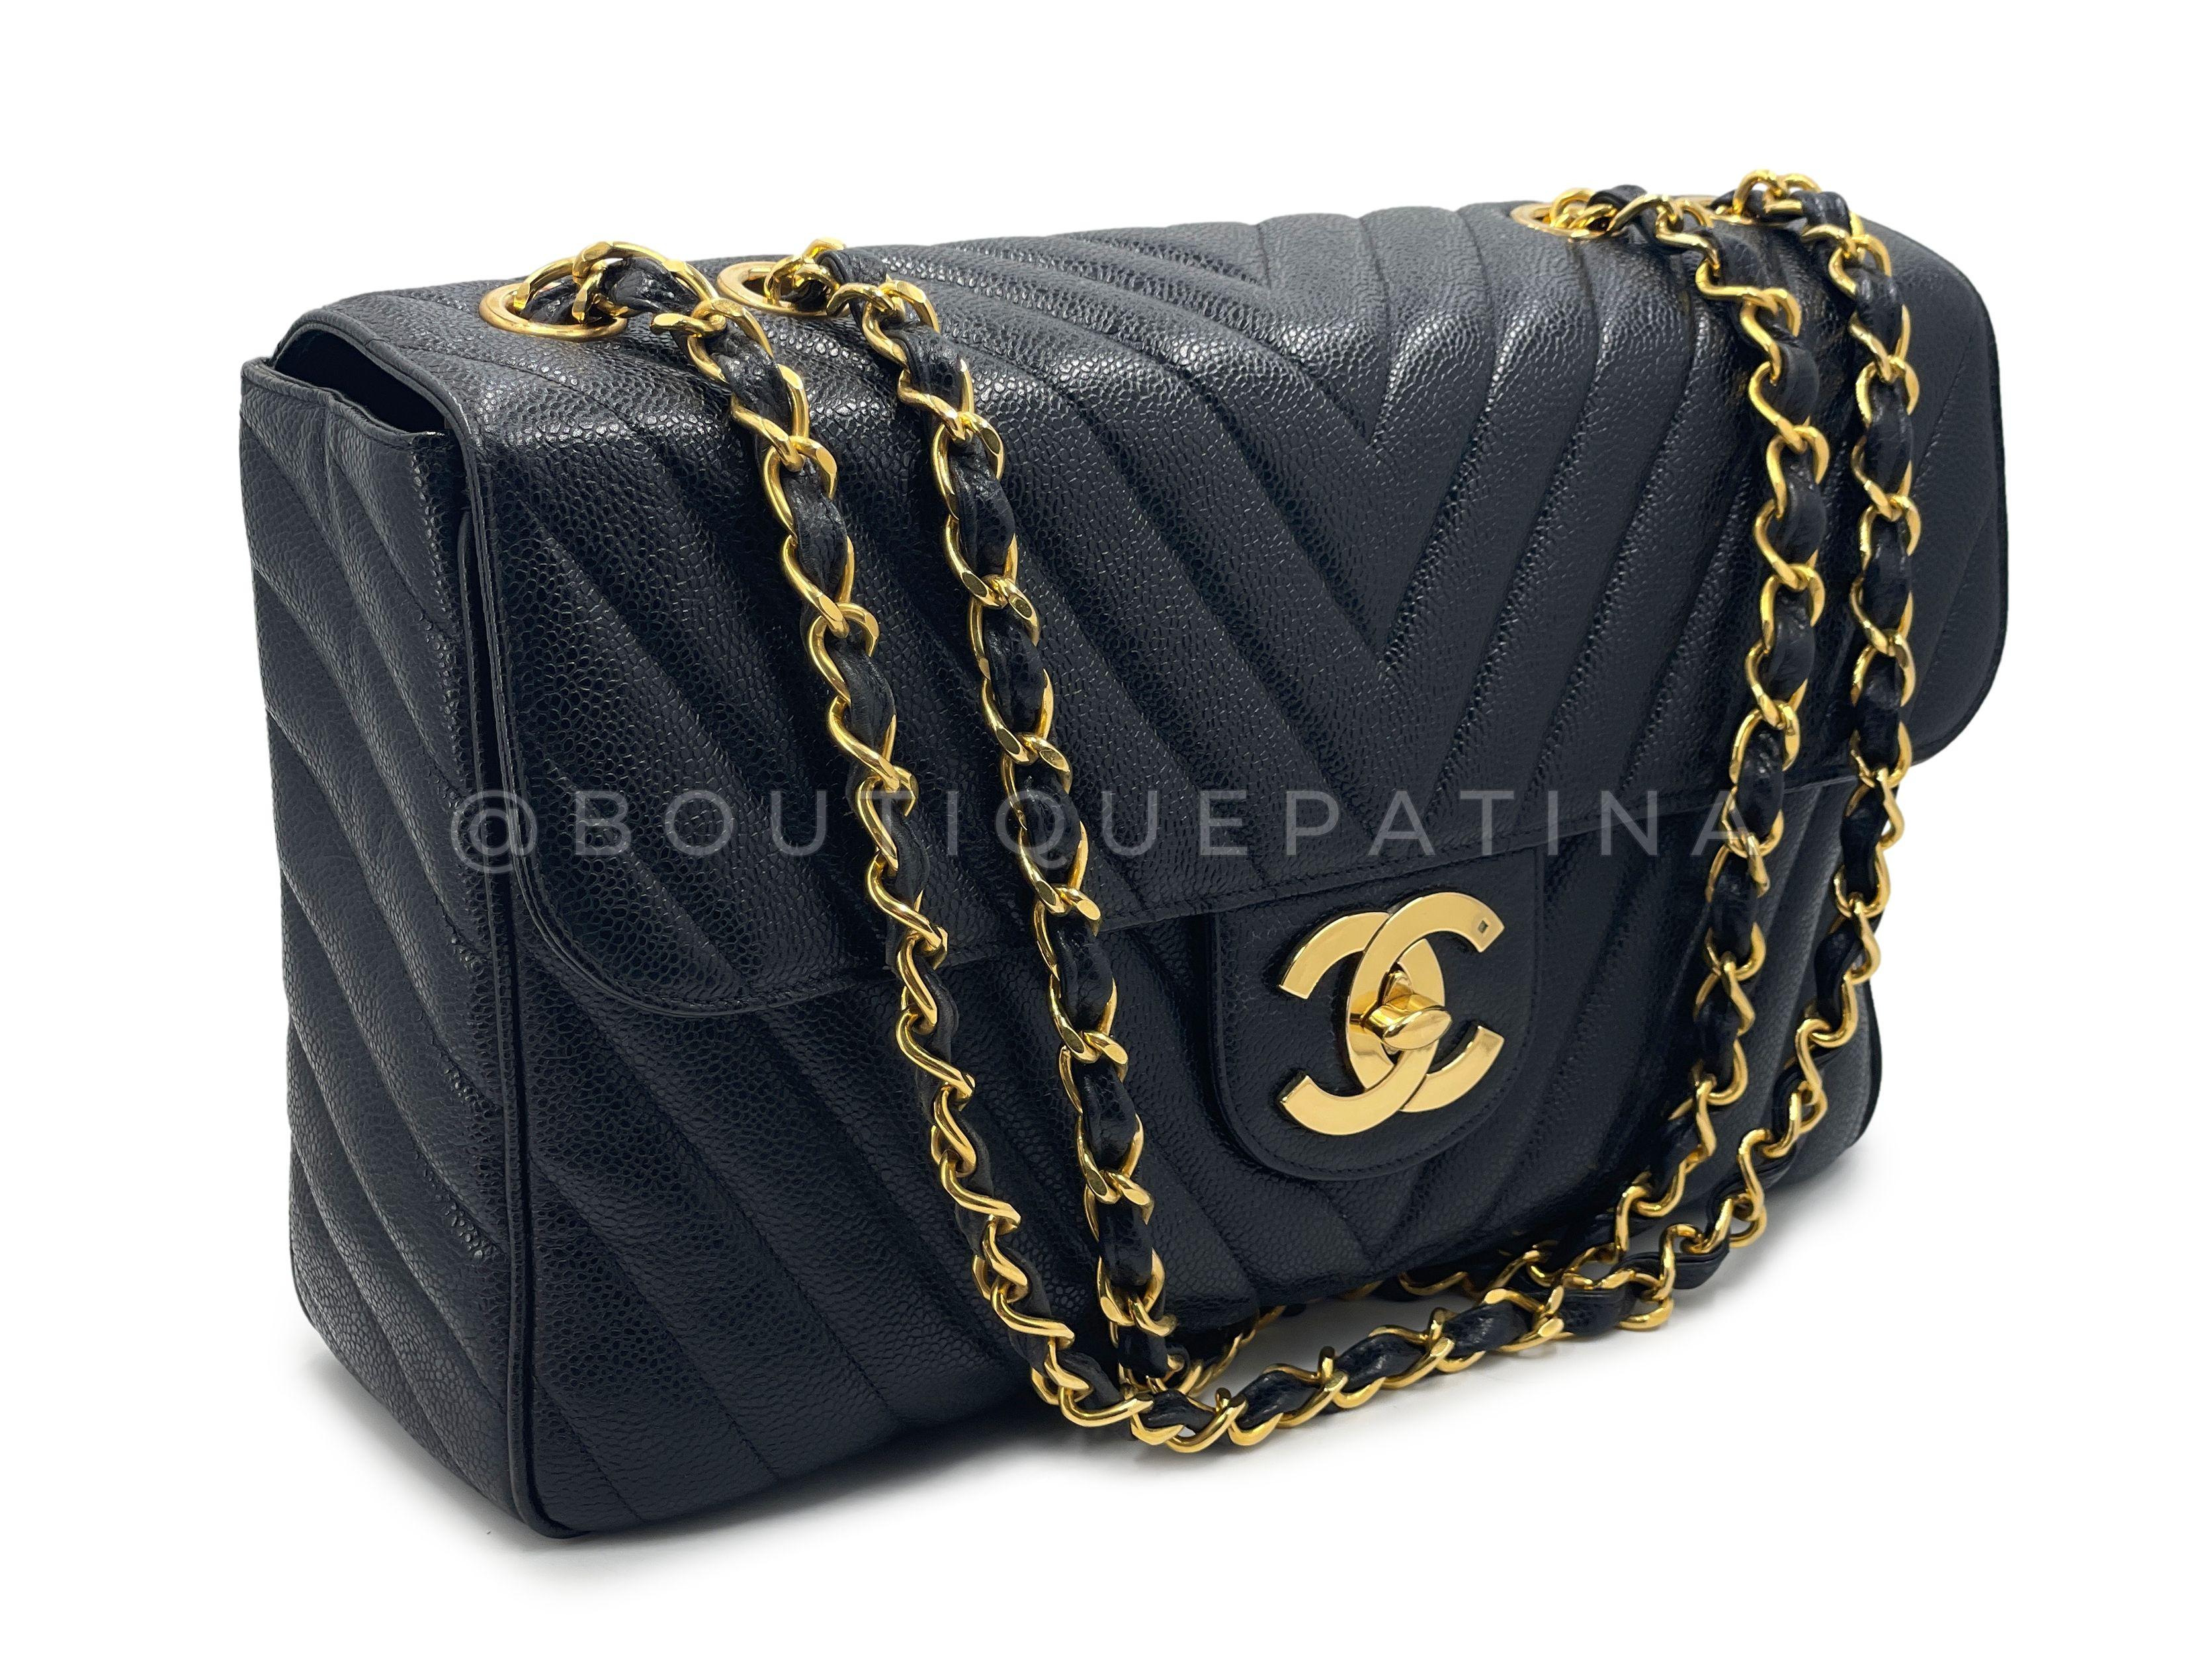 Store item: 66750
The Cadillac of all vintage Chanel flaps is this 14